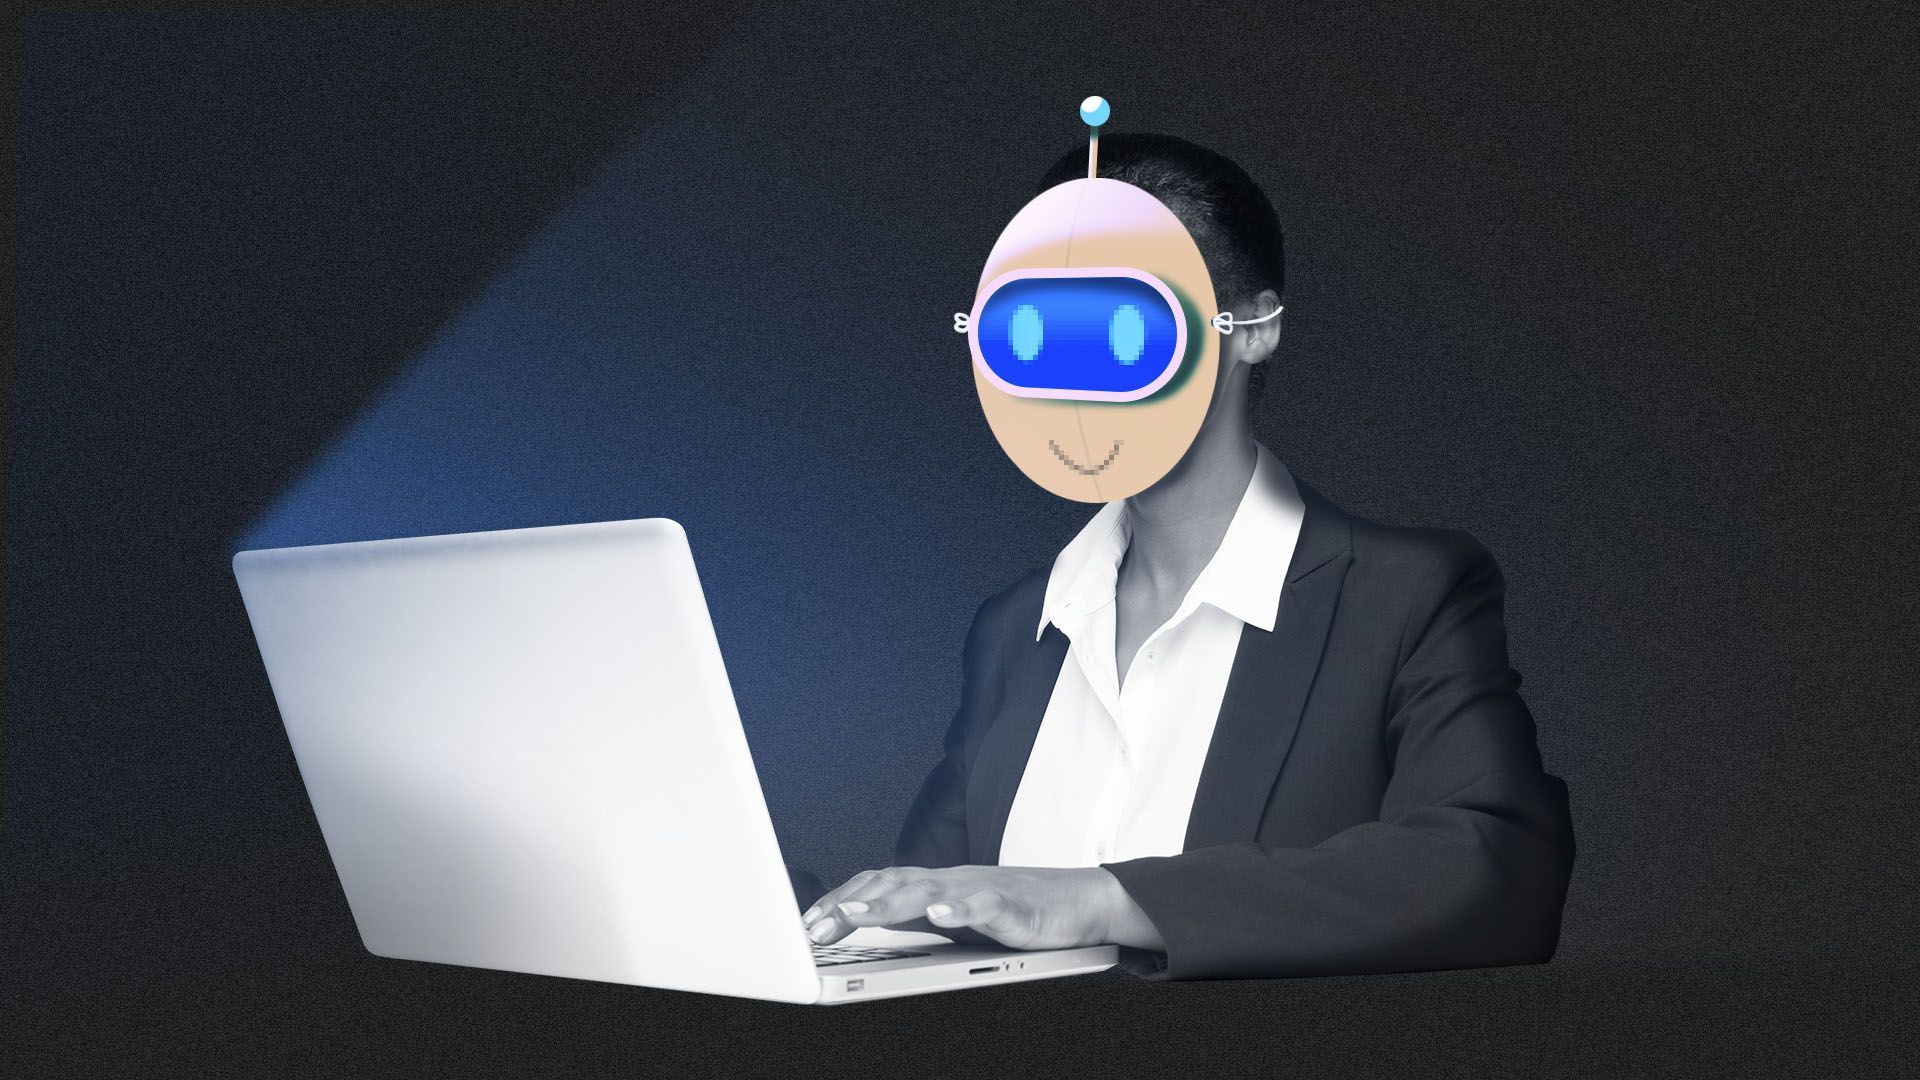 Illustration of a woman working at a computer, with a robot mask over her face